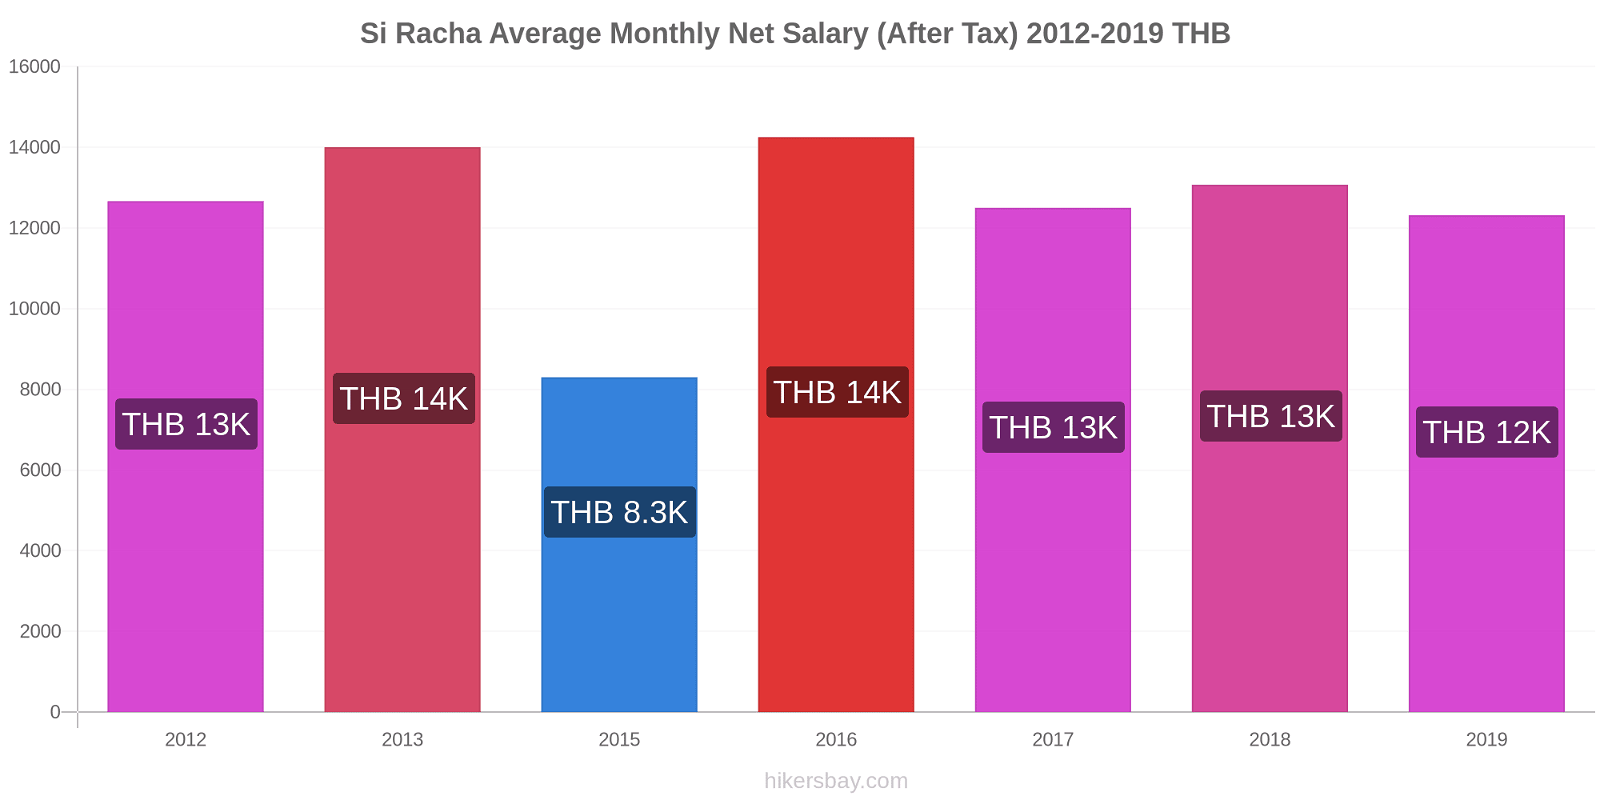 Si Racha price changes Average Monthly Net Salary (After Tax) hikersbay.com